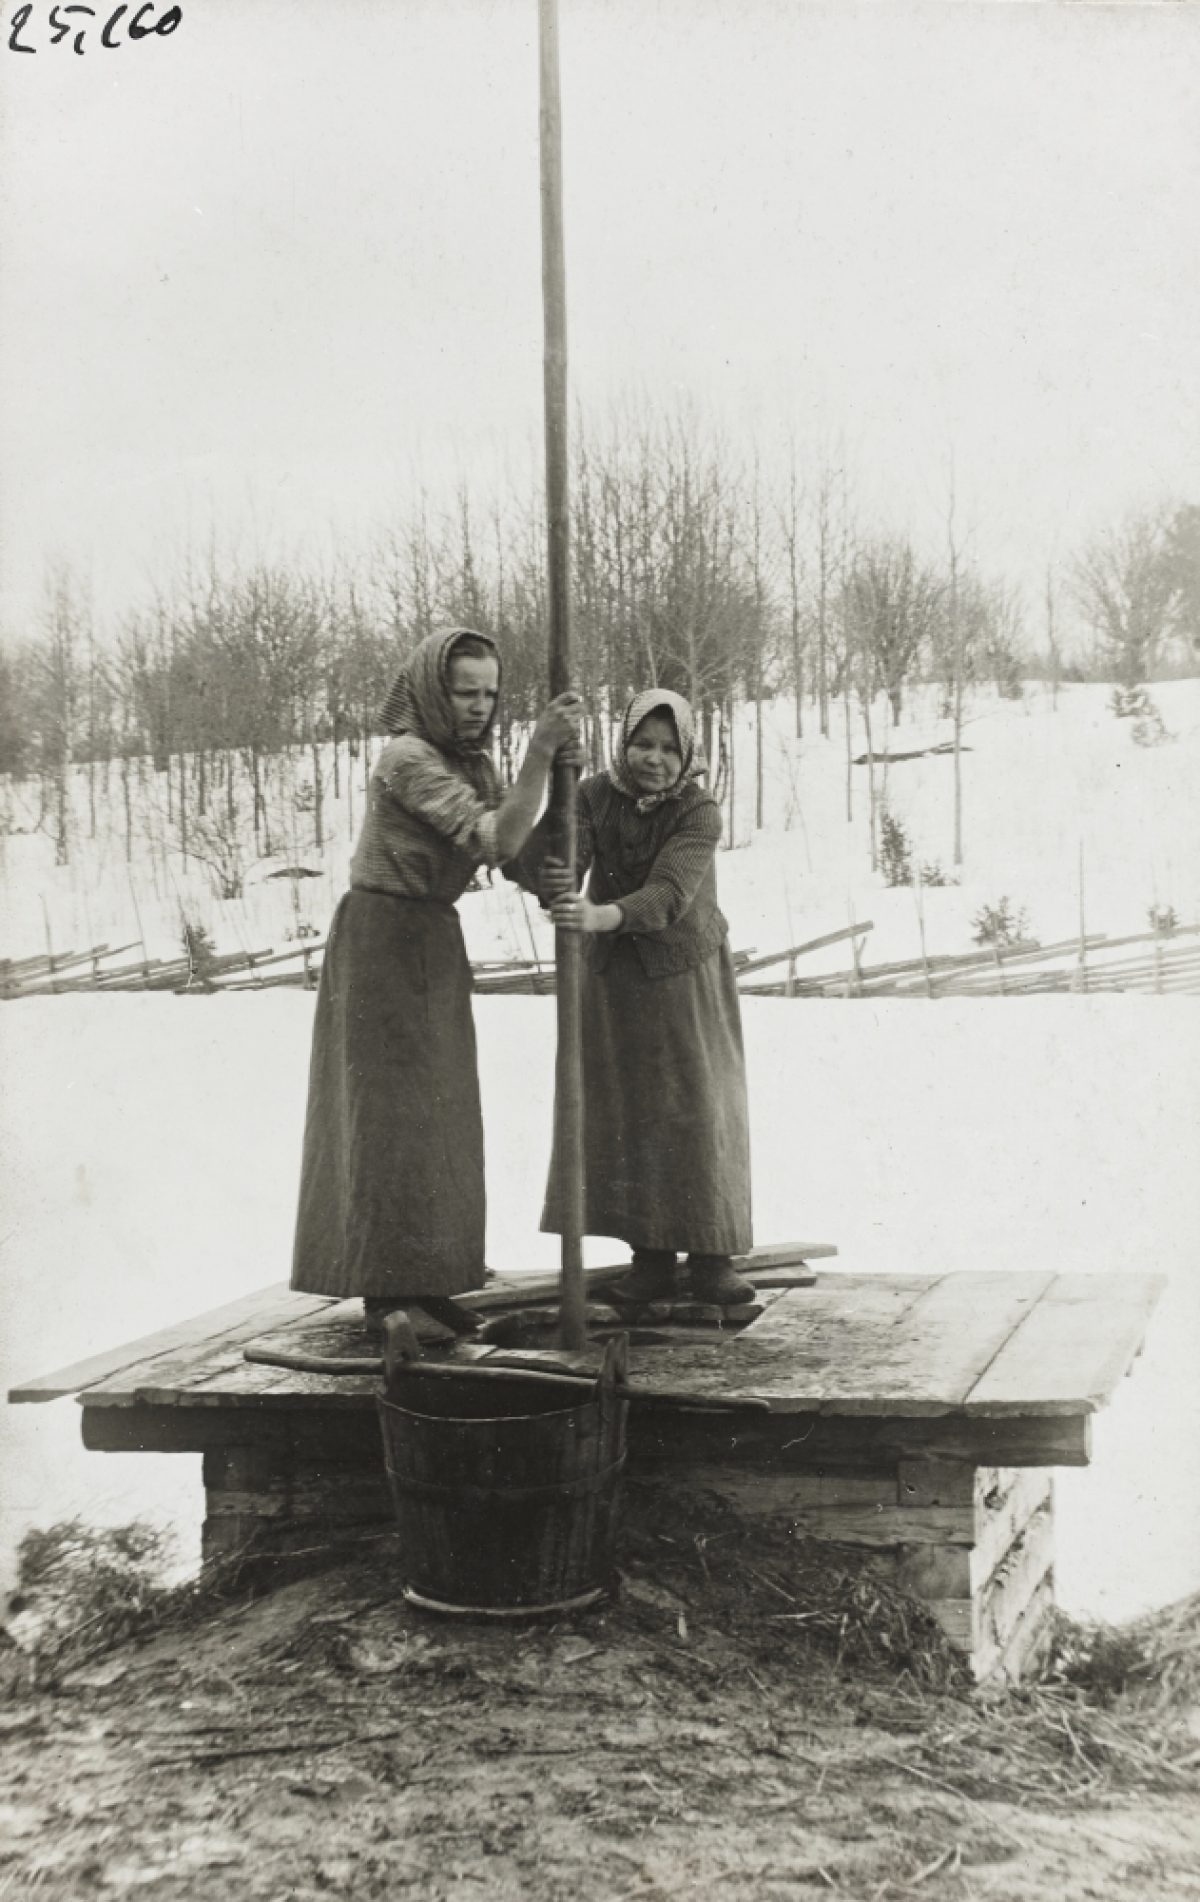 Women lifting water up from a well in Airanne village, in the rural municipality of Sortavala. Photo: Liina Cantell / Collection of the Karelian student nation at the University of Helsinki / Picture Collections of the Finnish Heritage Agency